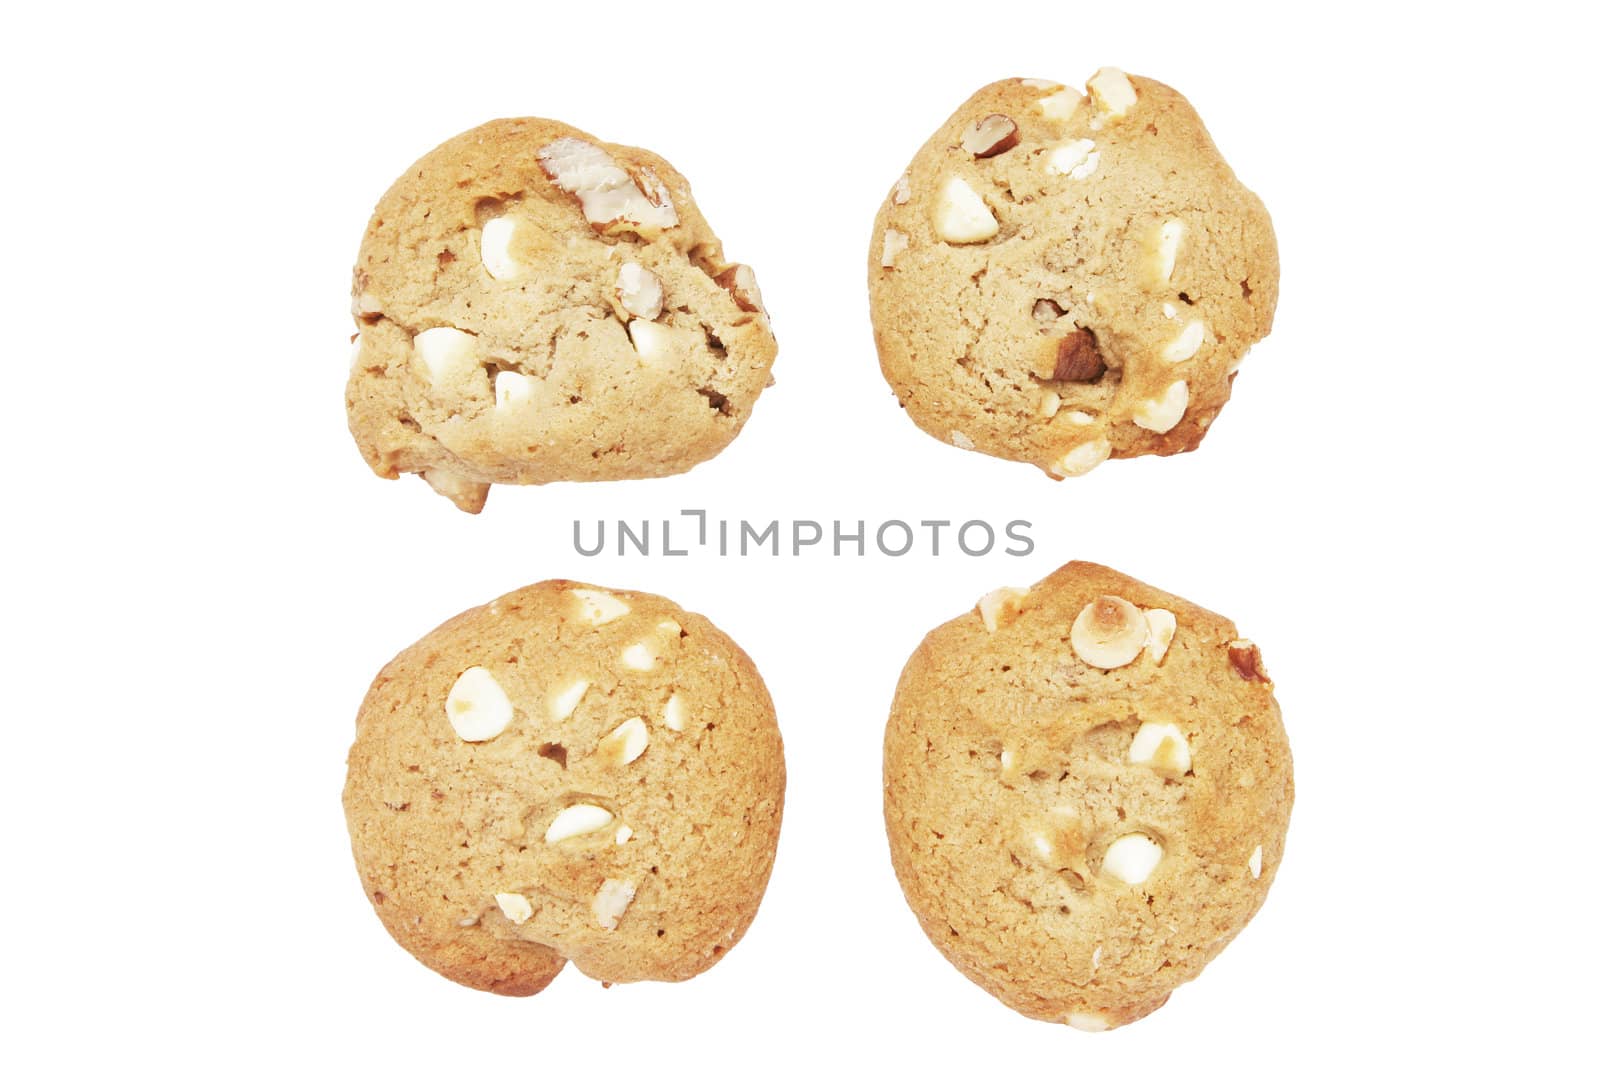 Four Cookie Biscuits With White Chocolate And Macadamia Nuts, Plain Background